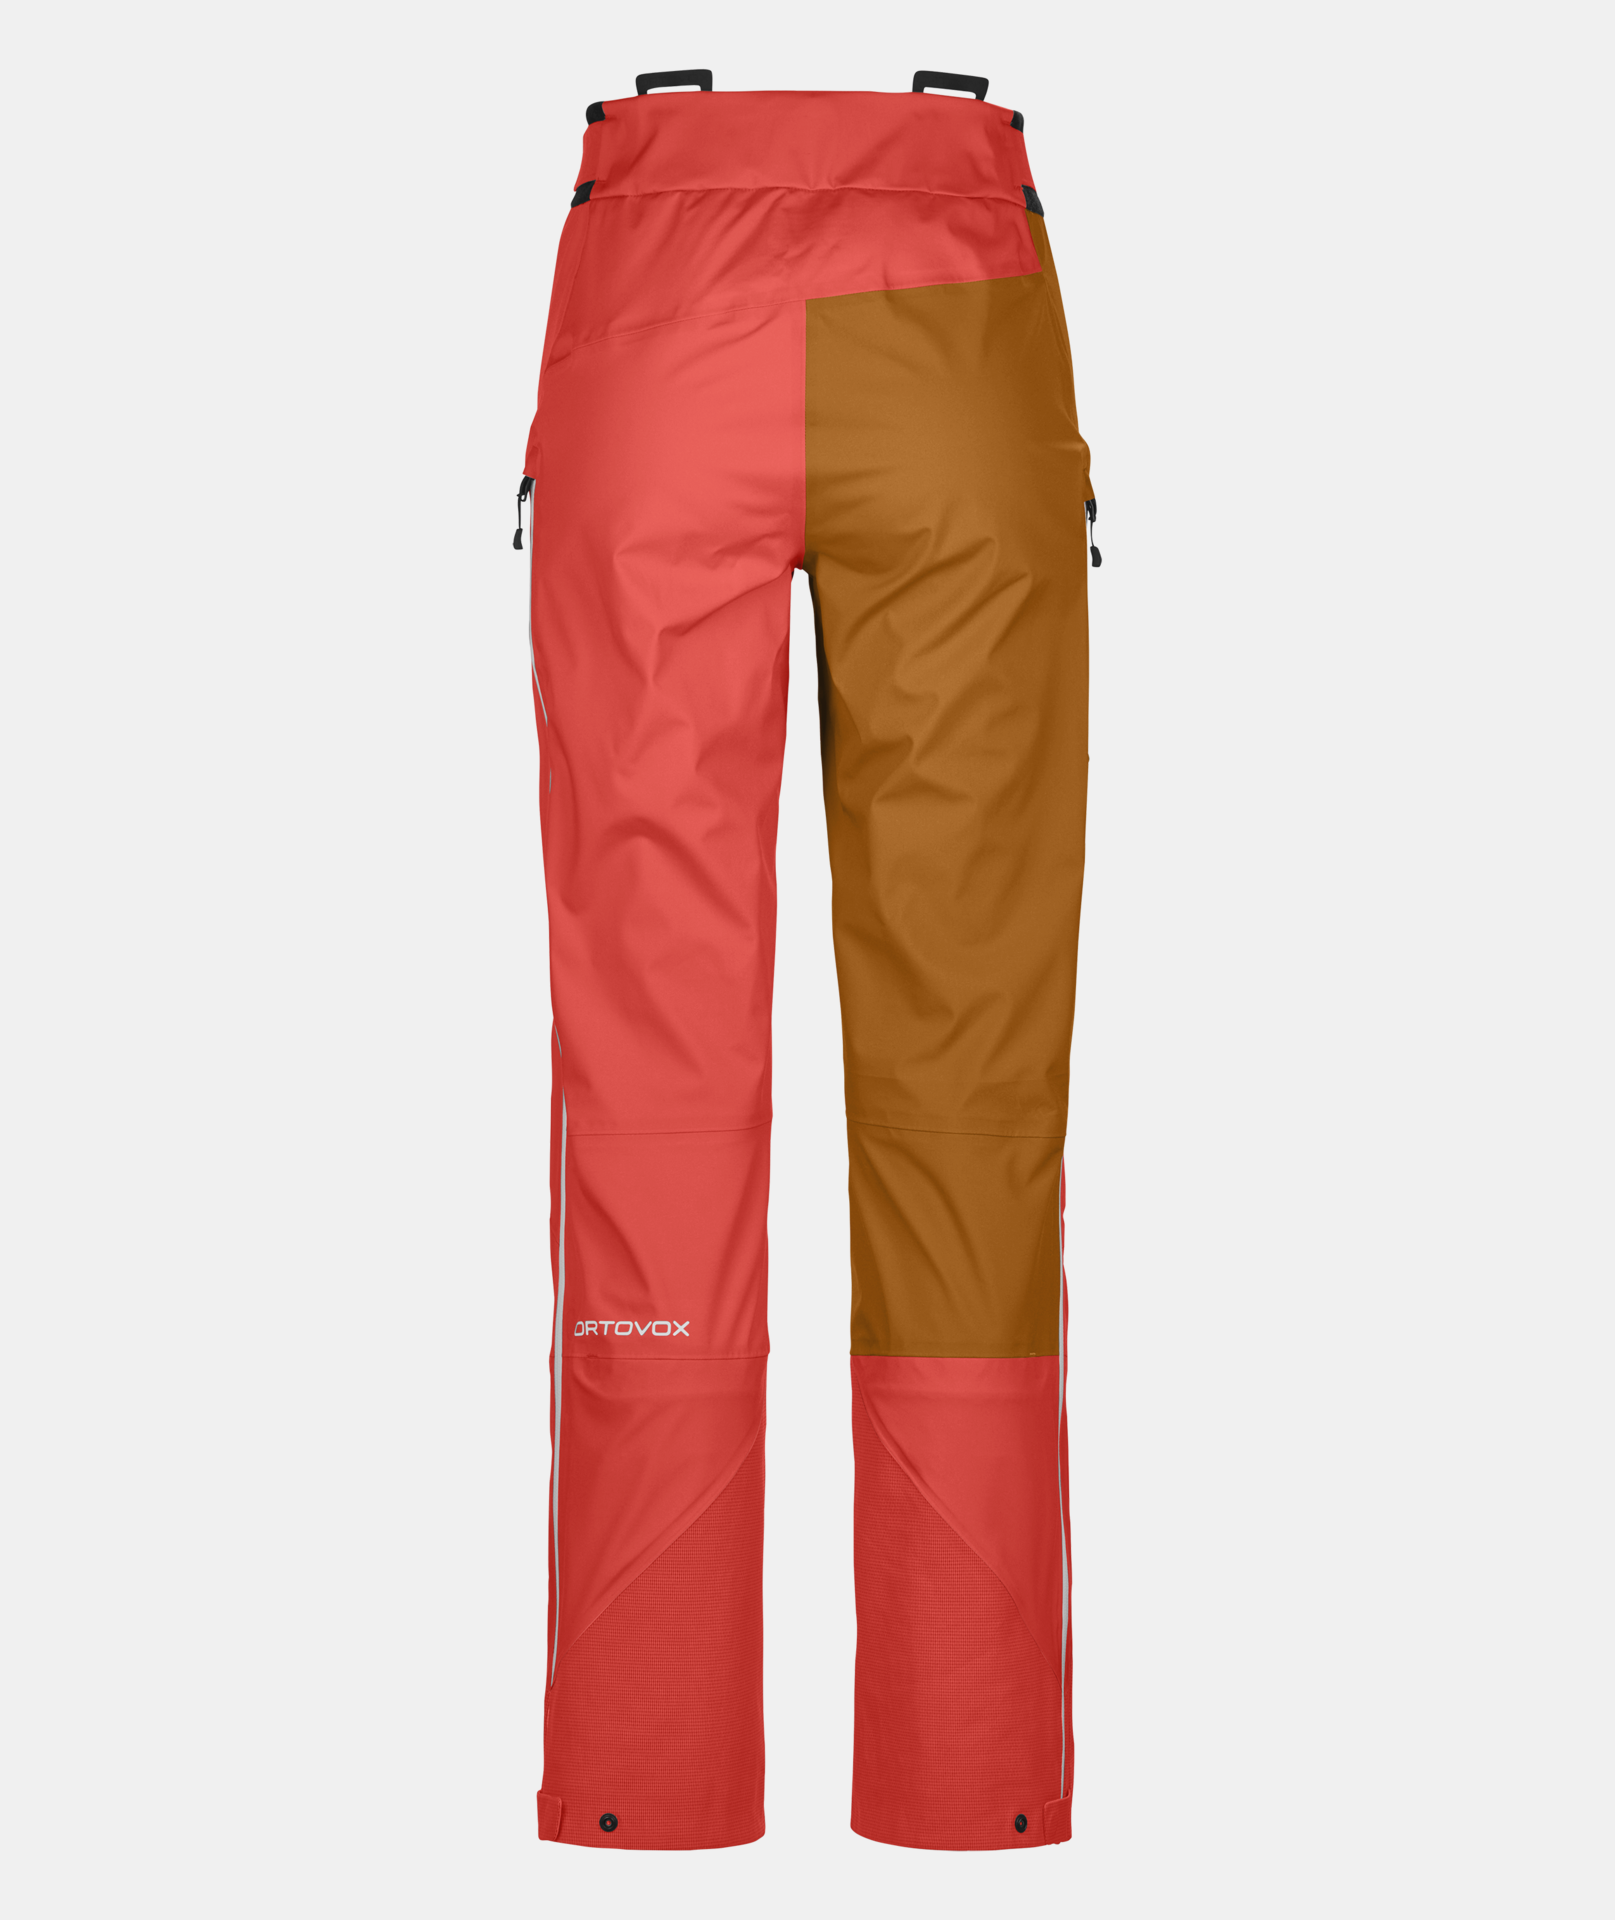 UKC Gear - GROUP TEST: Winter Mountain Overtrousers